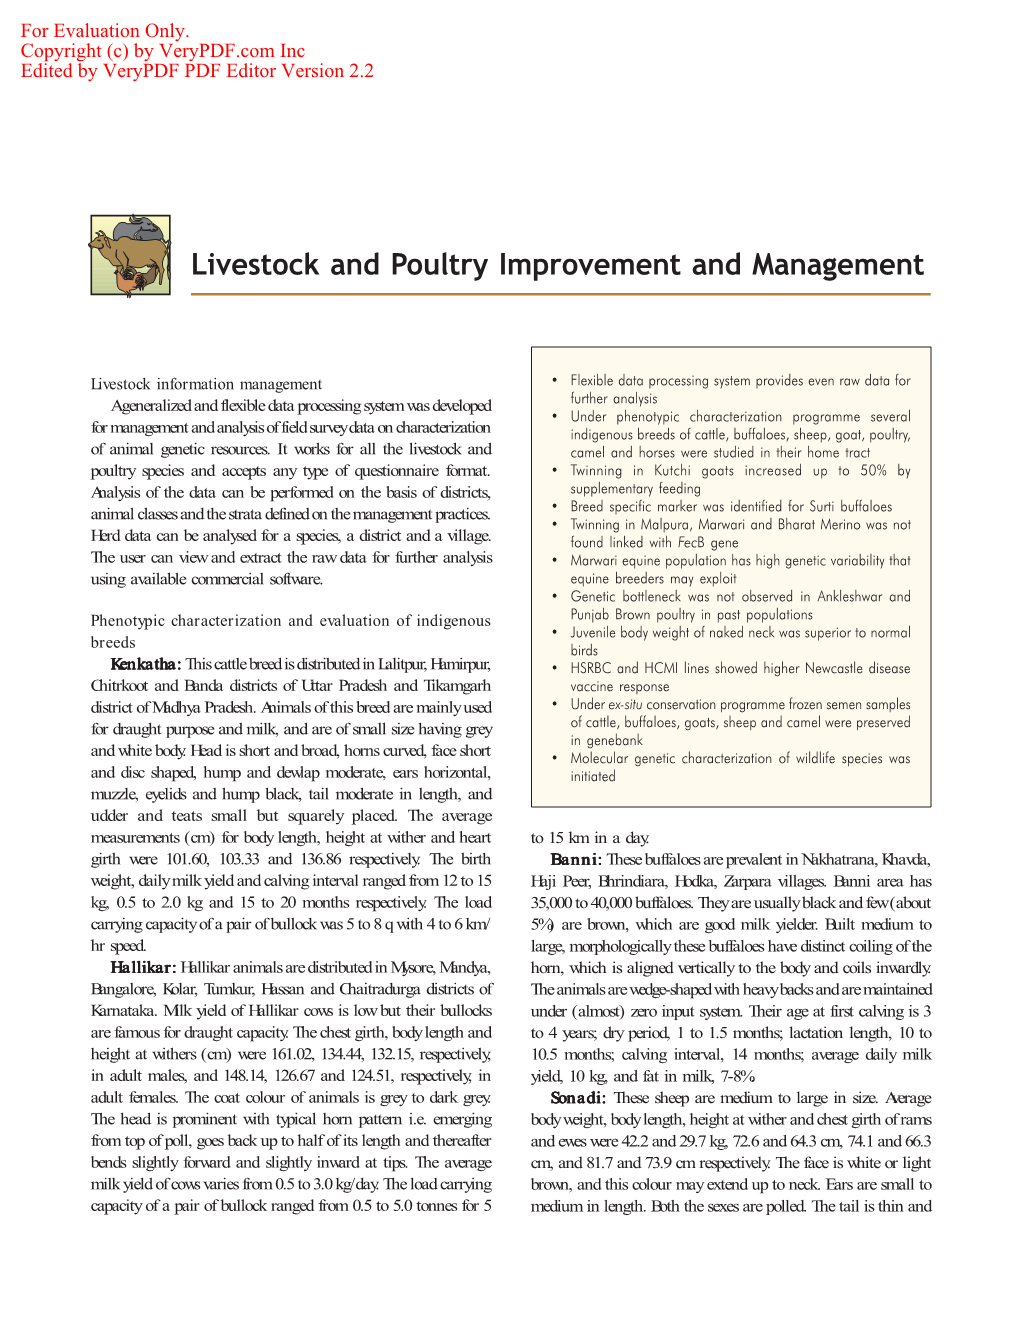 Livestock and Poultry Improvement and Management